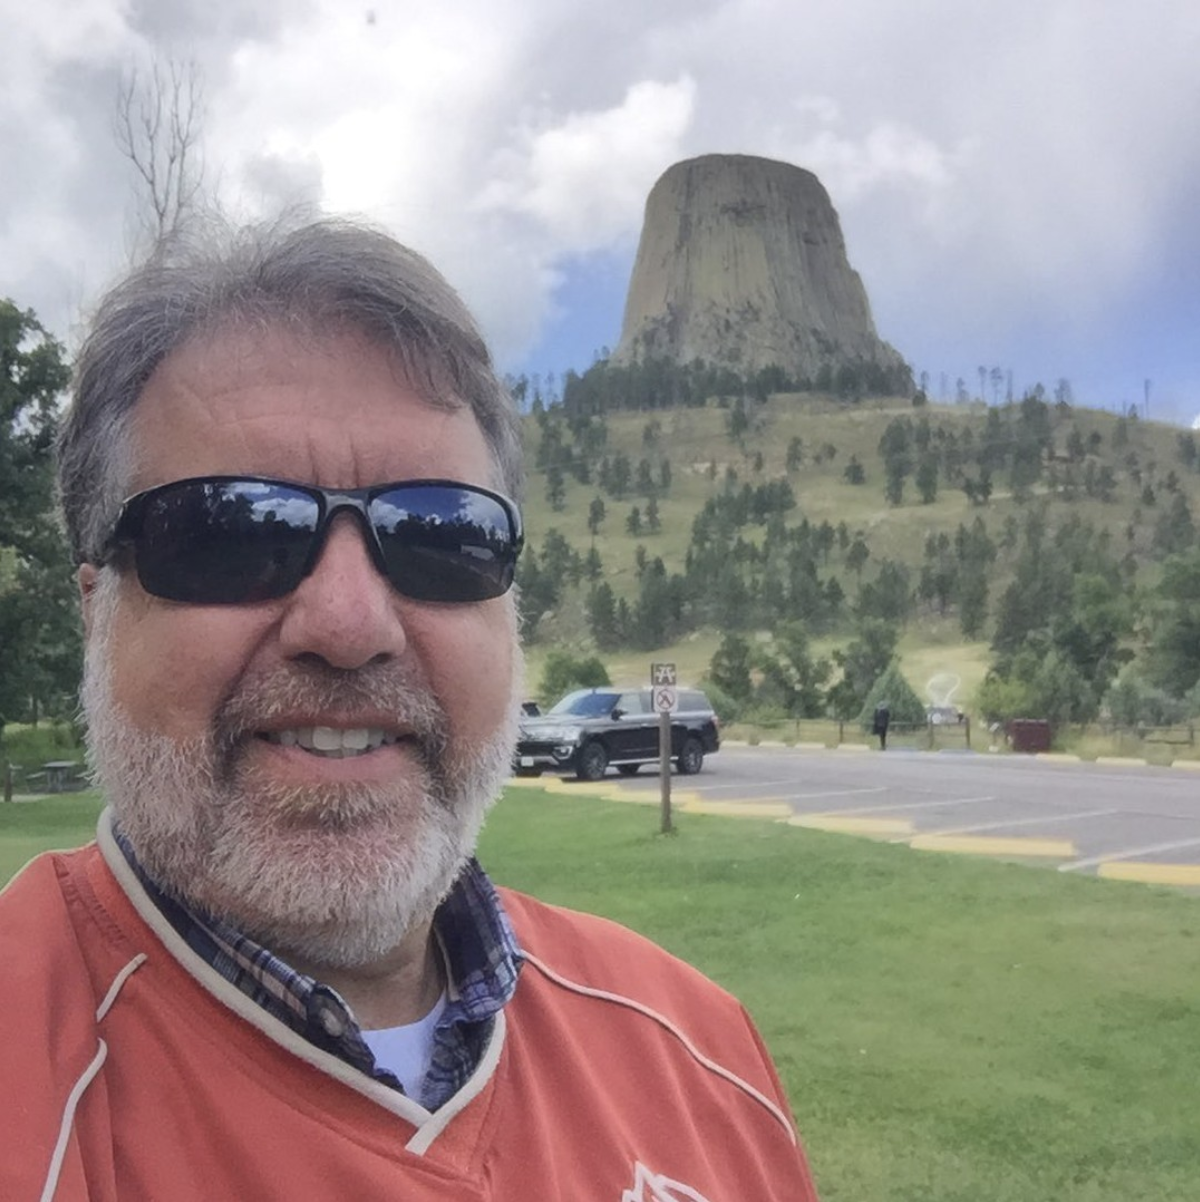 Image of South Dakotas travel expert Randy wearing a red T Shirt and sunglasses with the Crazy Horse Memorial in the background.